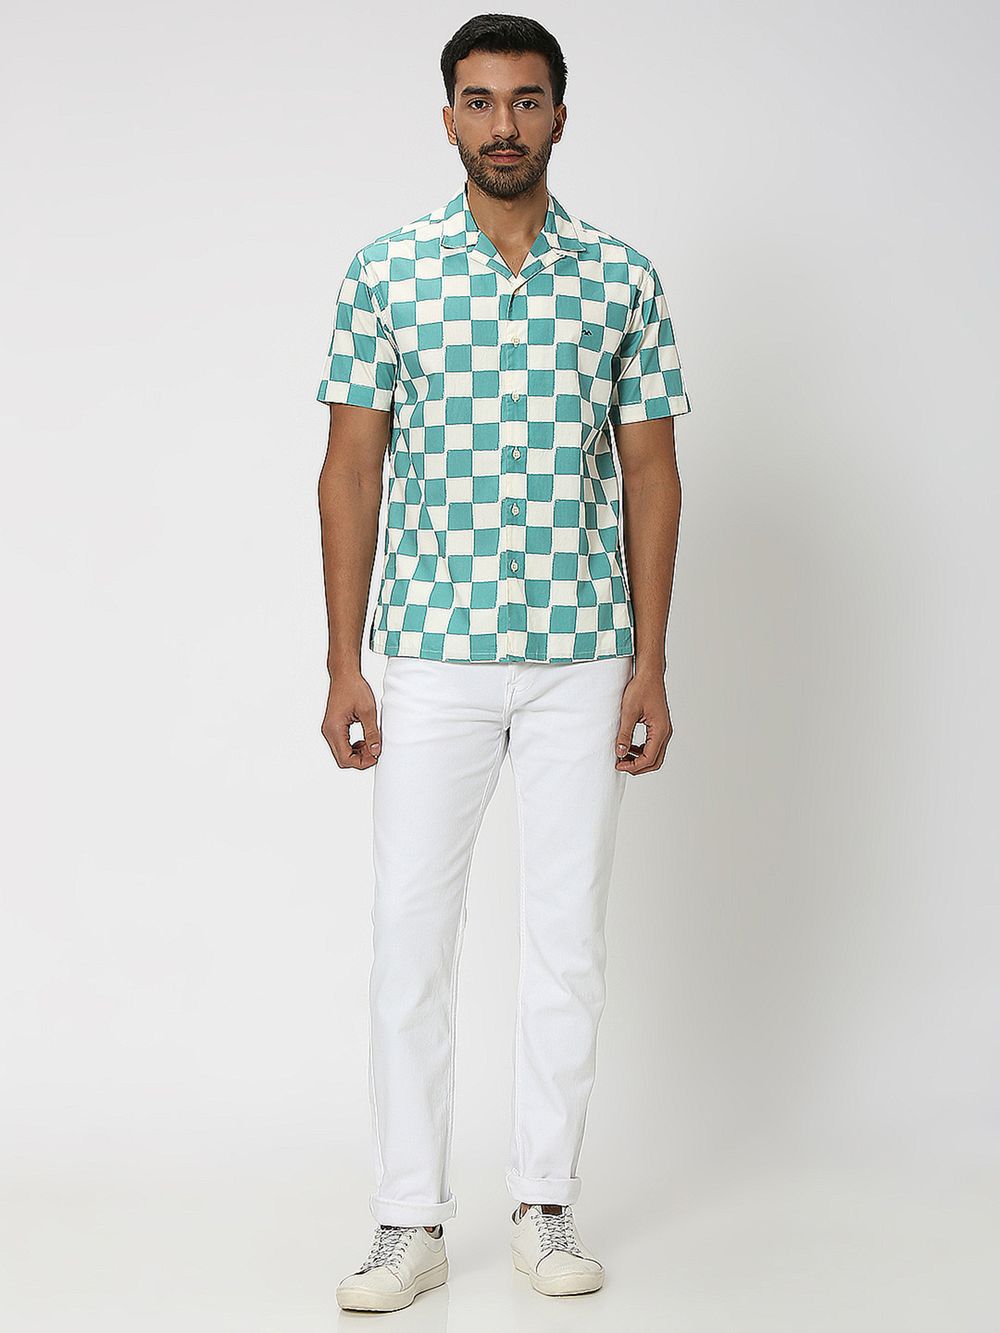 Turquoise Square Check Shirt